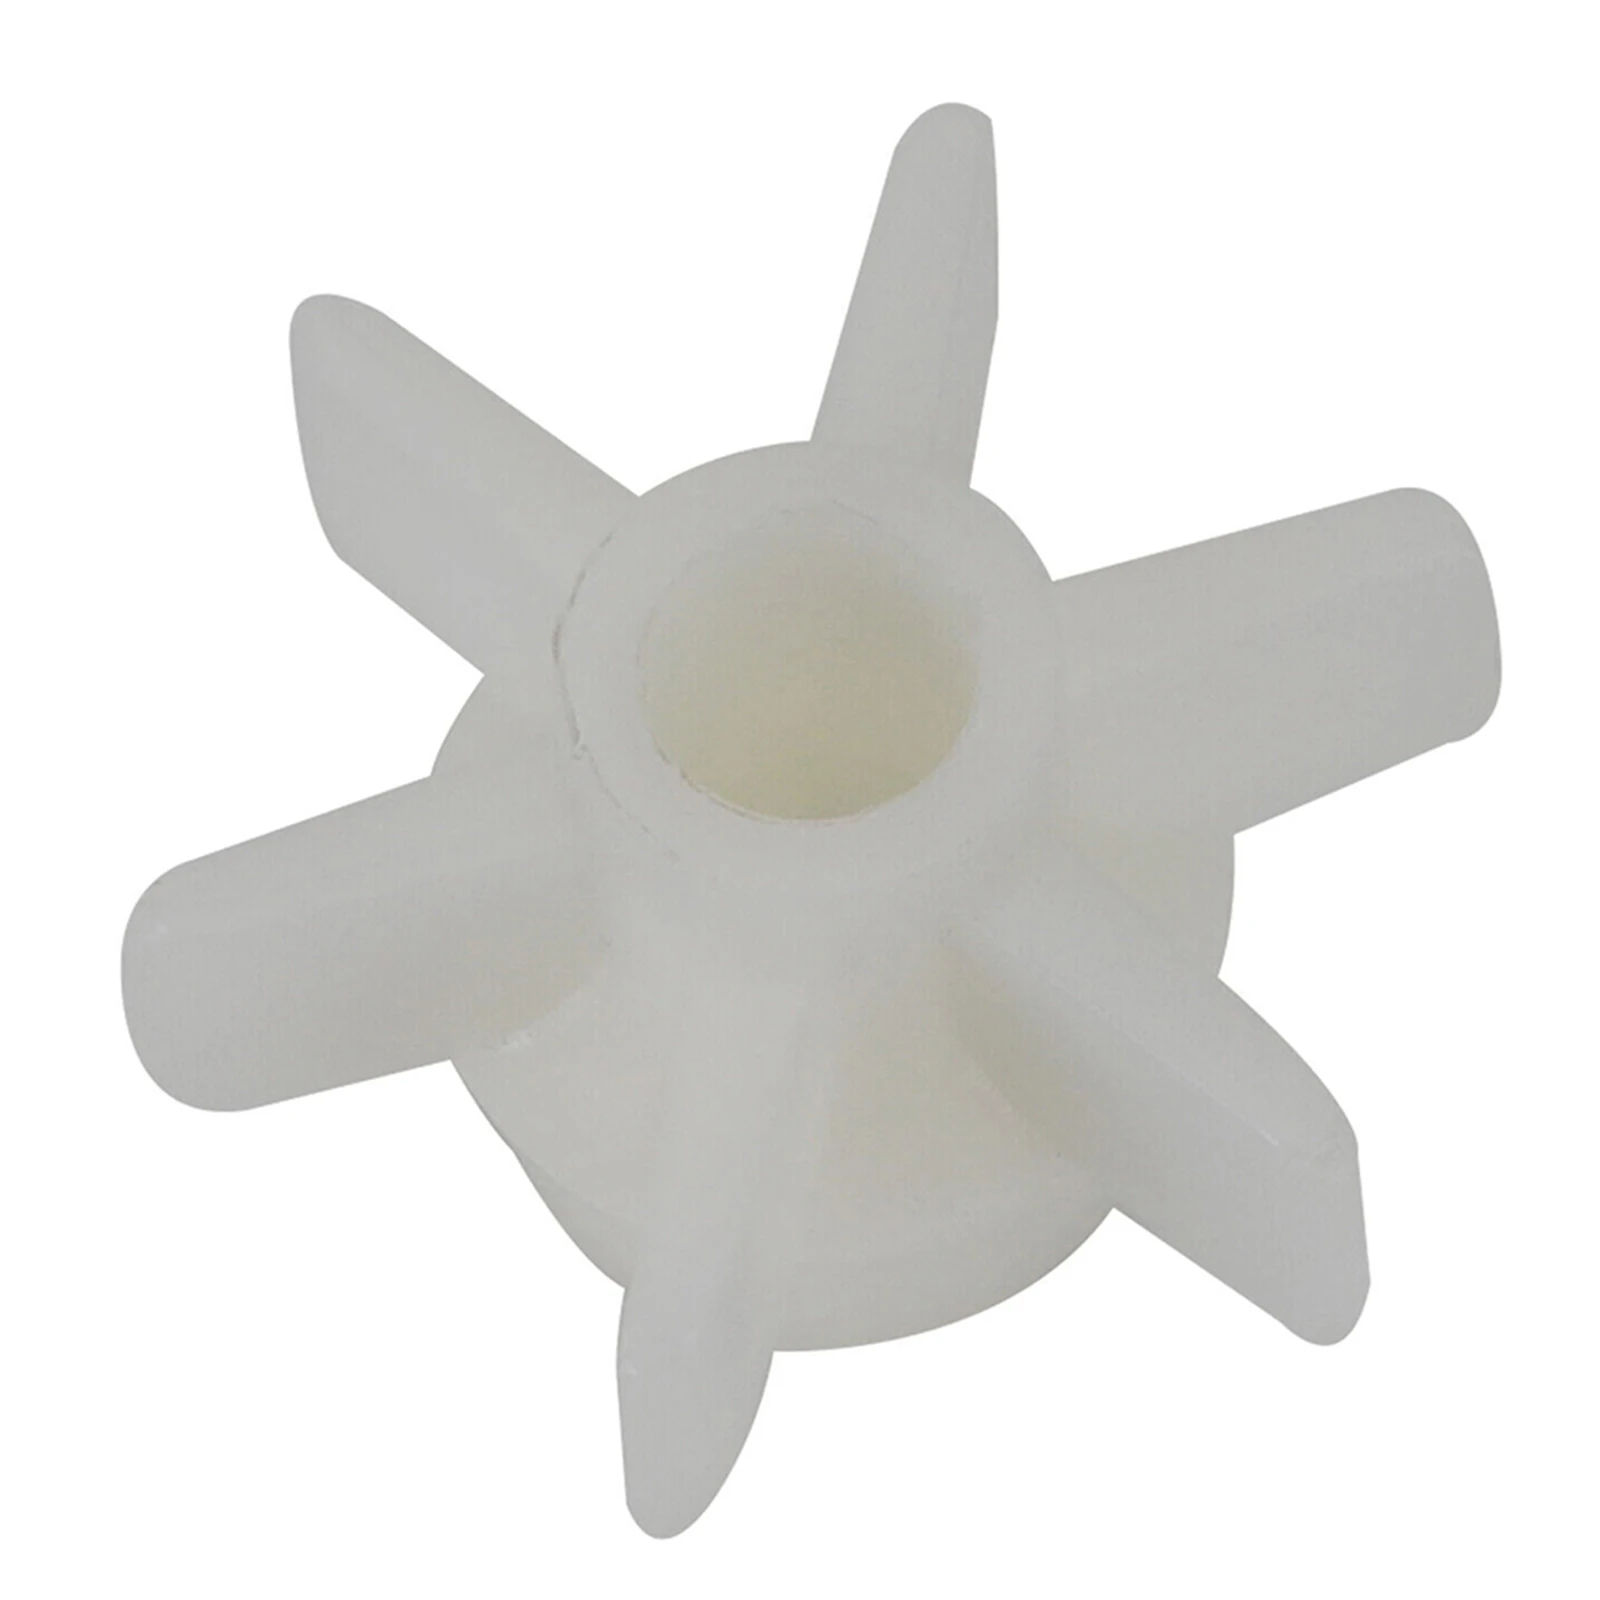 

Plastic Impeller Blades Pool Pump Reinforced Impeller Parts For SFX1000 SFX1500+ Garden Swimming Pool Tool Accessories